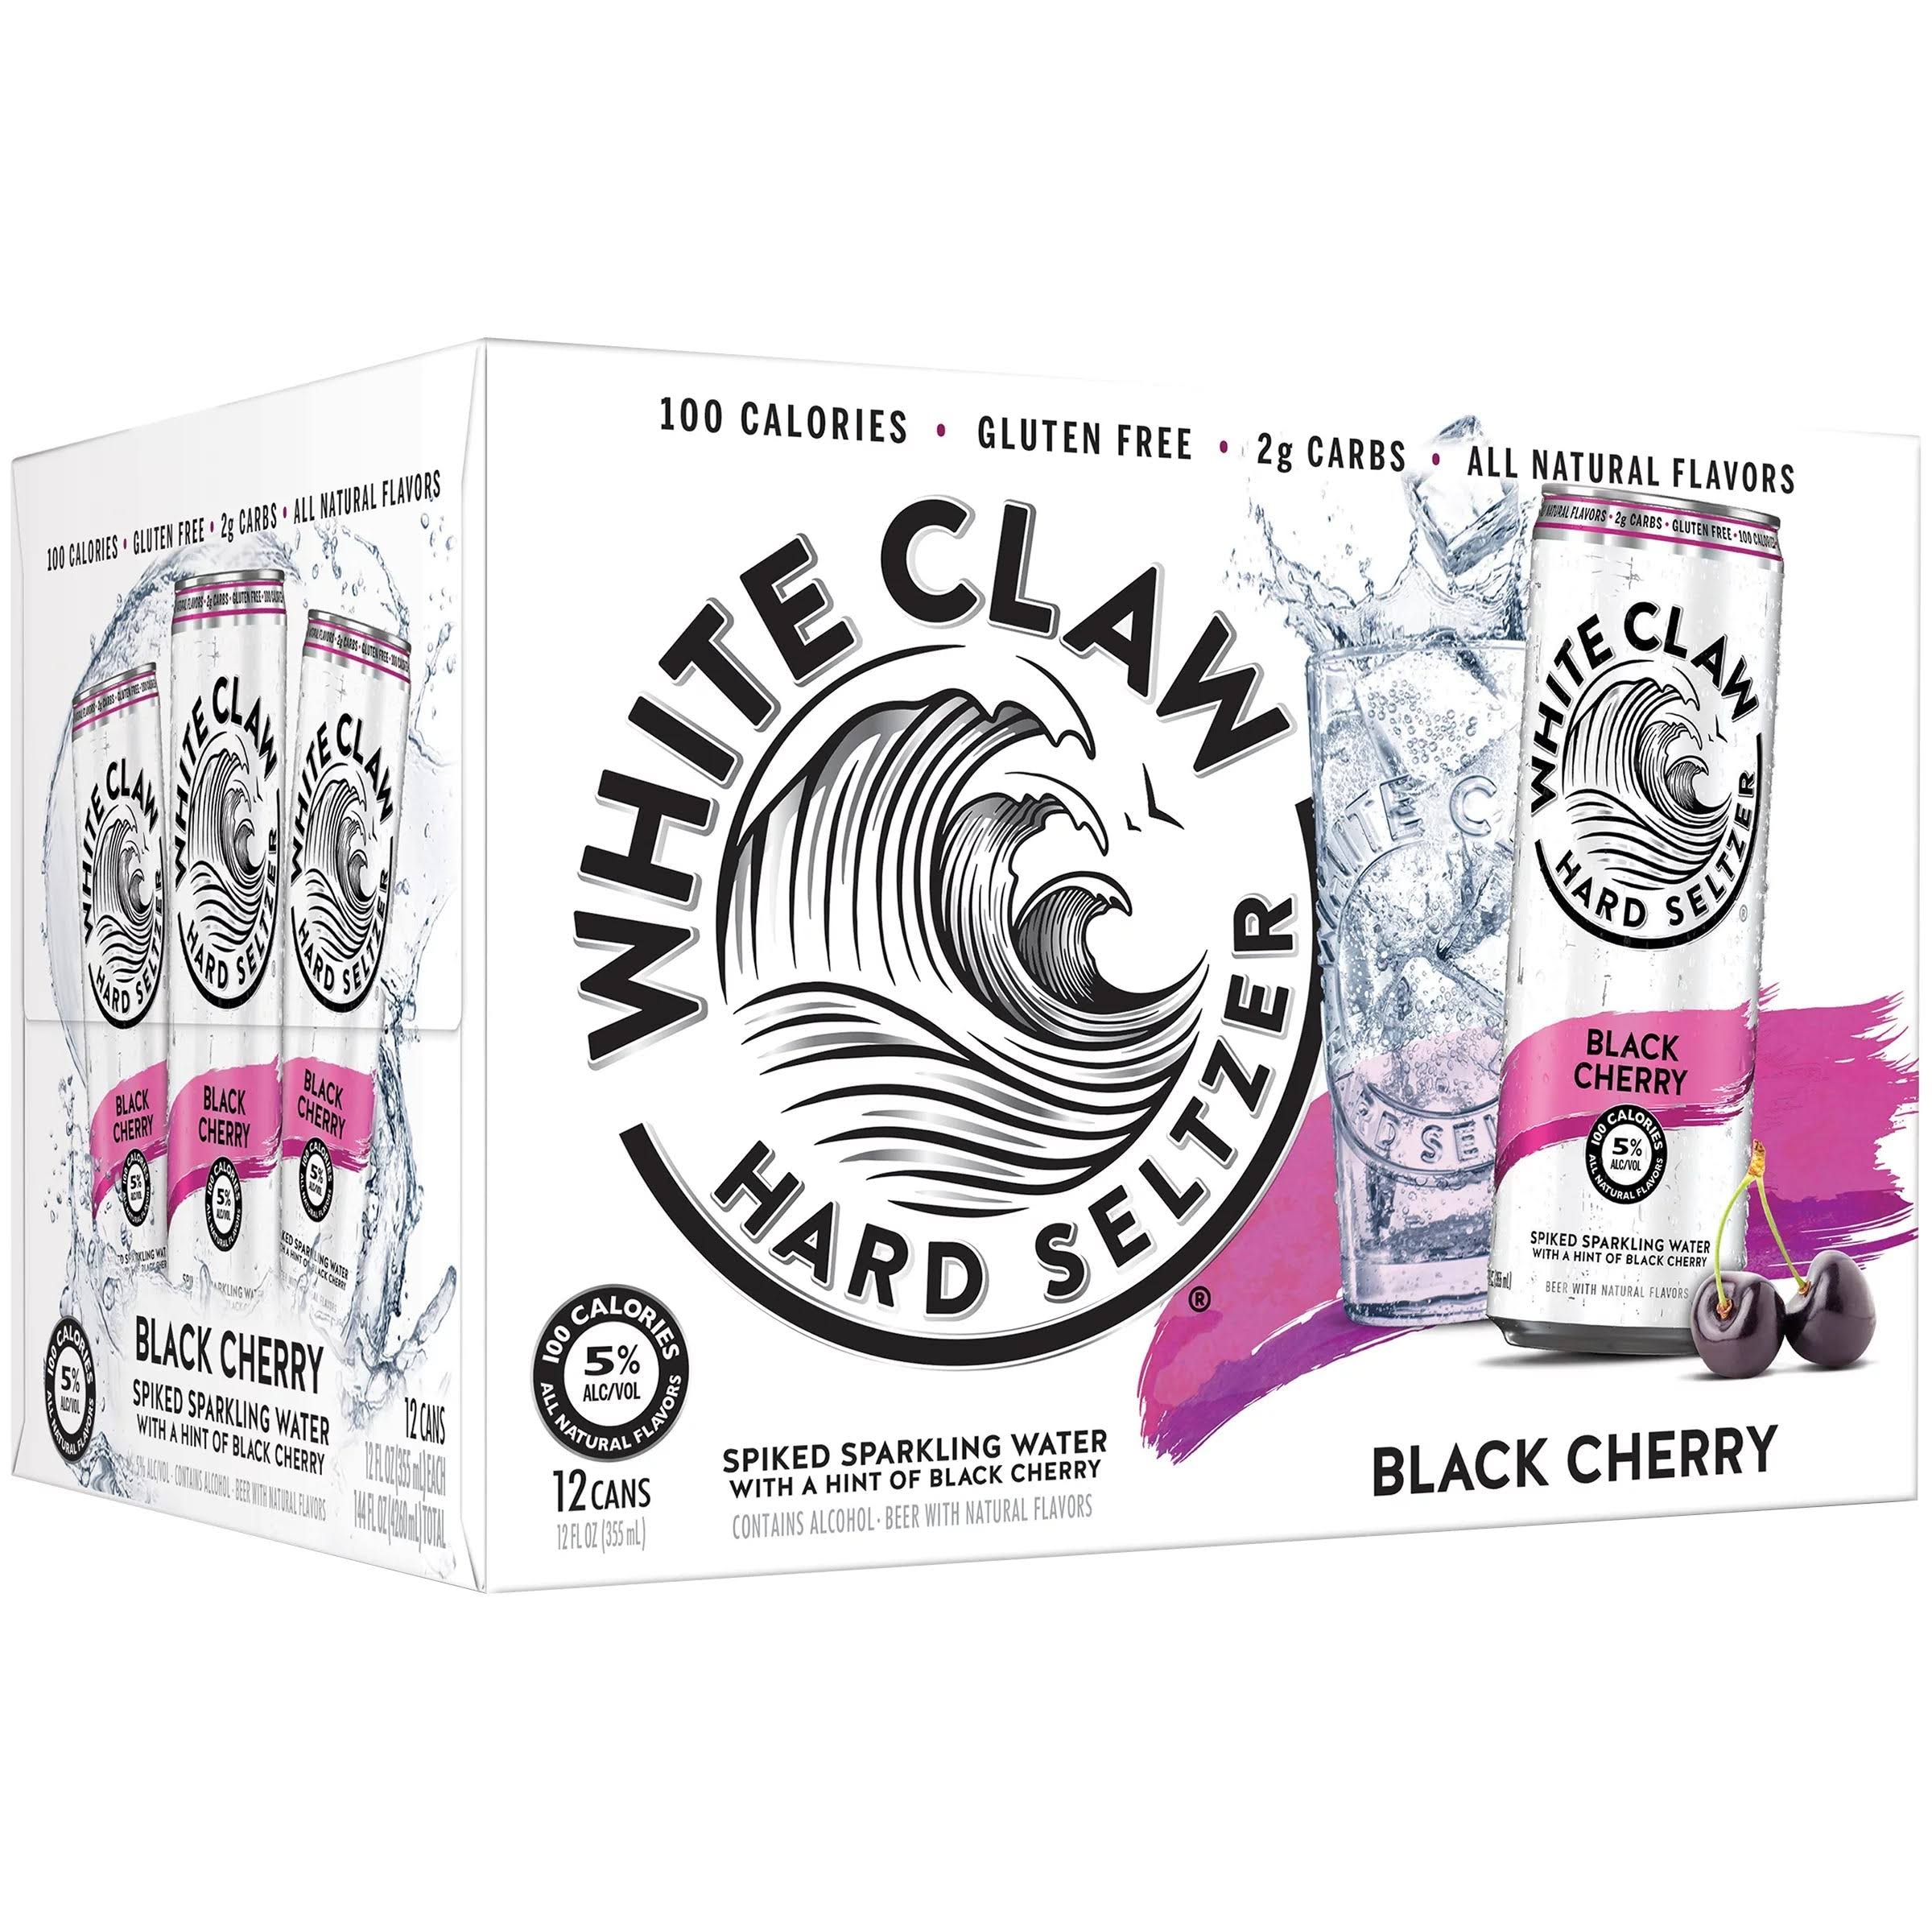 White Claw Hard Seltzer, Black Cherry - 12 pack, 12 fl oz cans